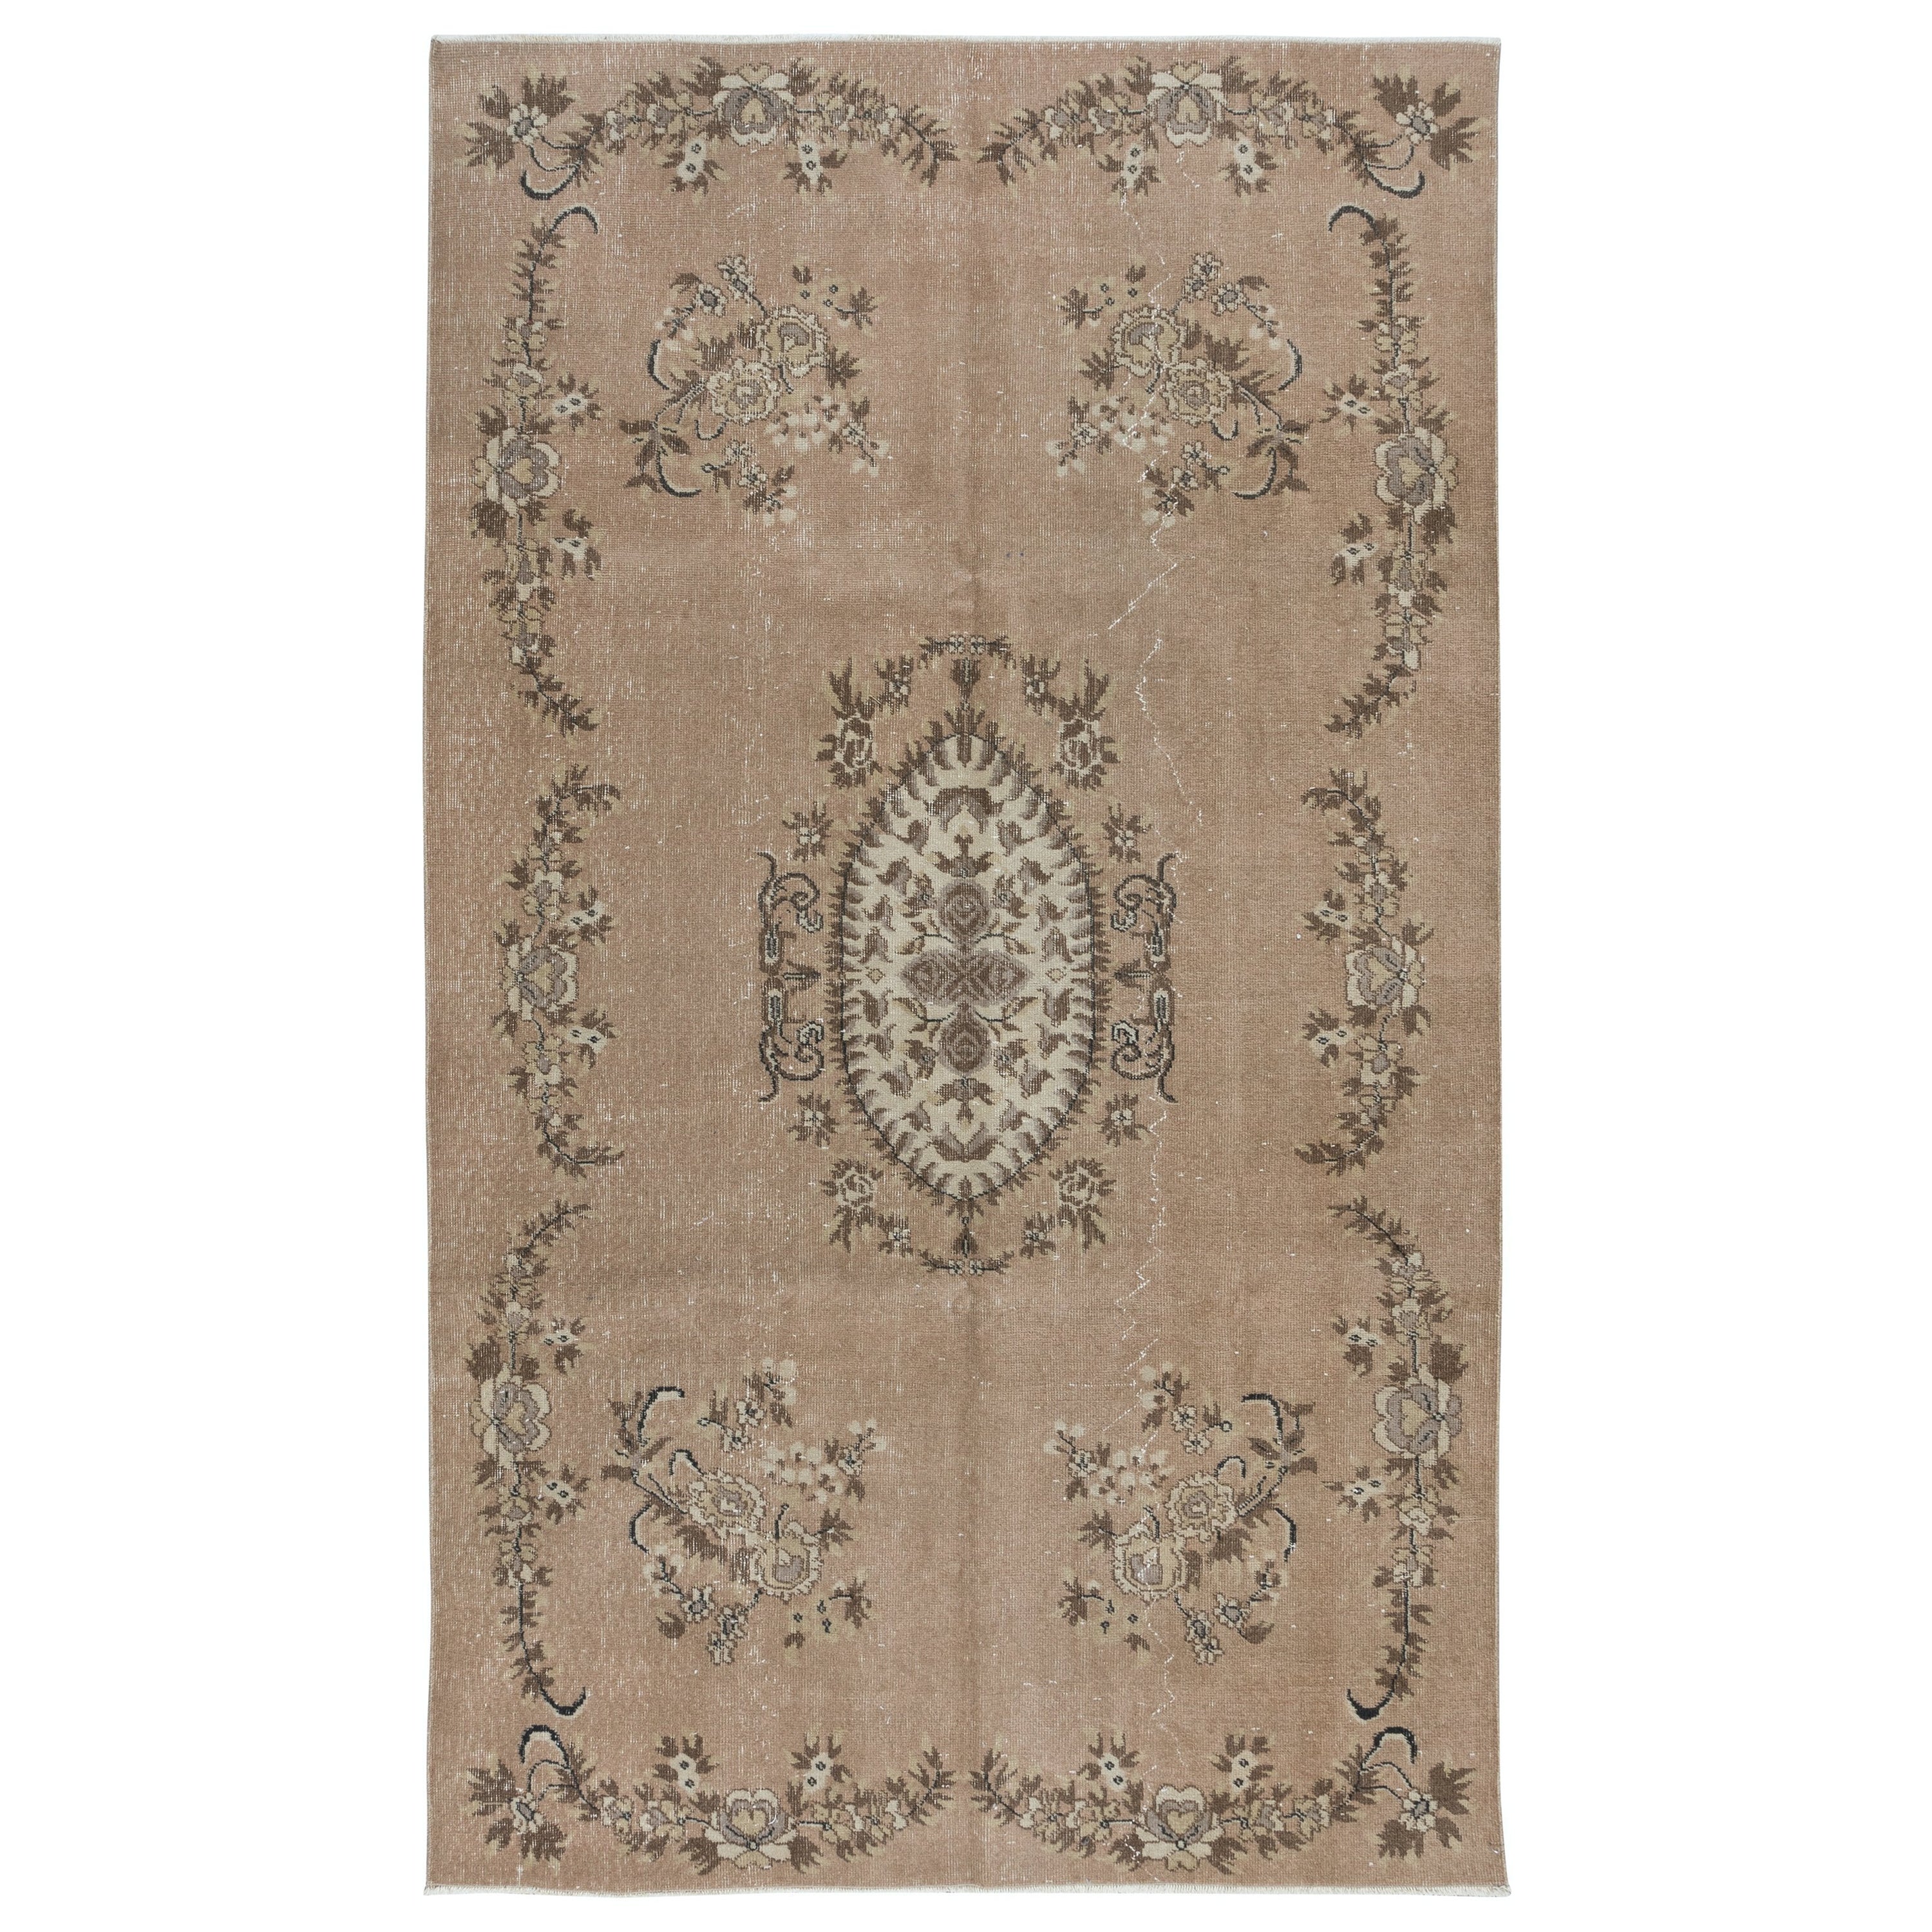 5.5x9 Ft Aubusson French Rug, Handmade Turkish Carpet for Country Homes & Rustic